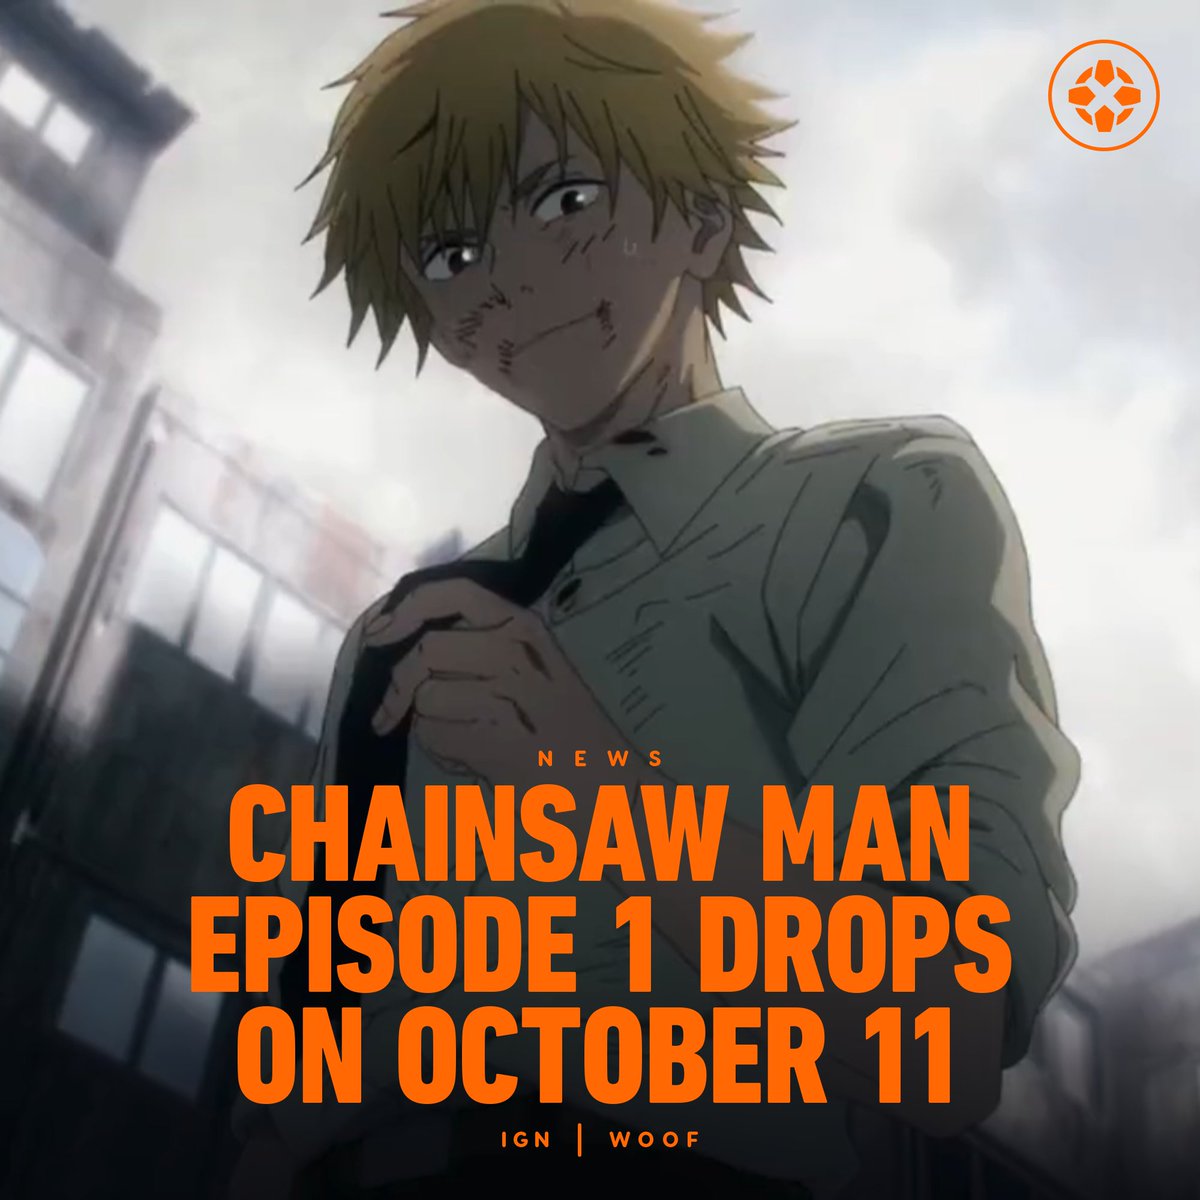 Chainsaw Man' Drops Tuesday: Stream the Anime Series on